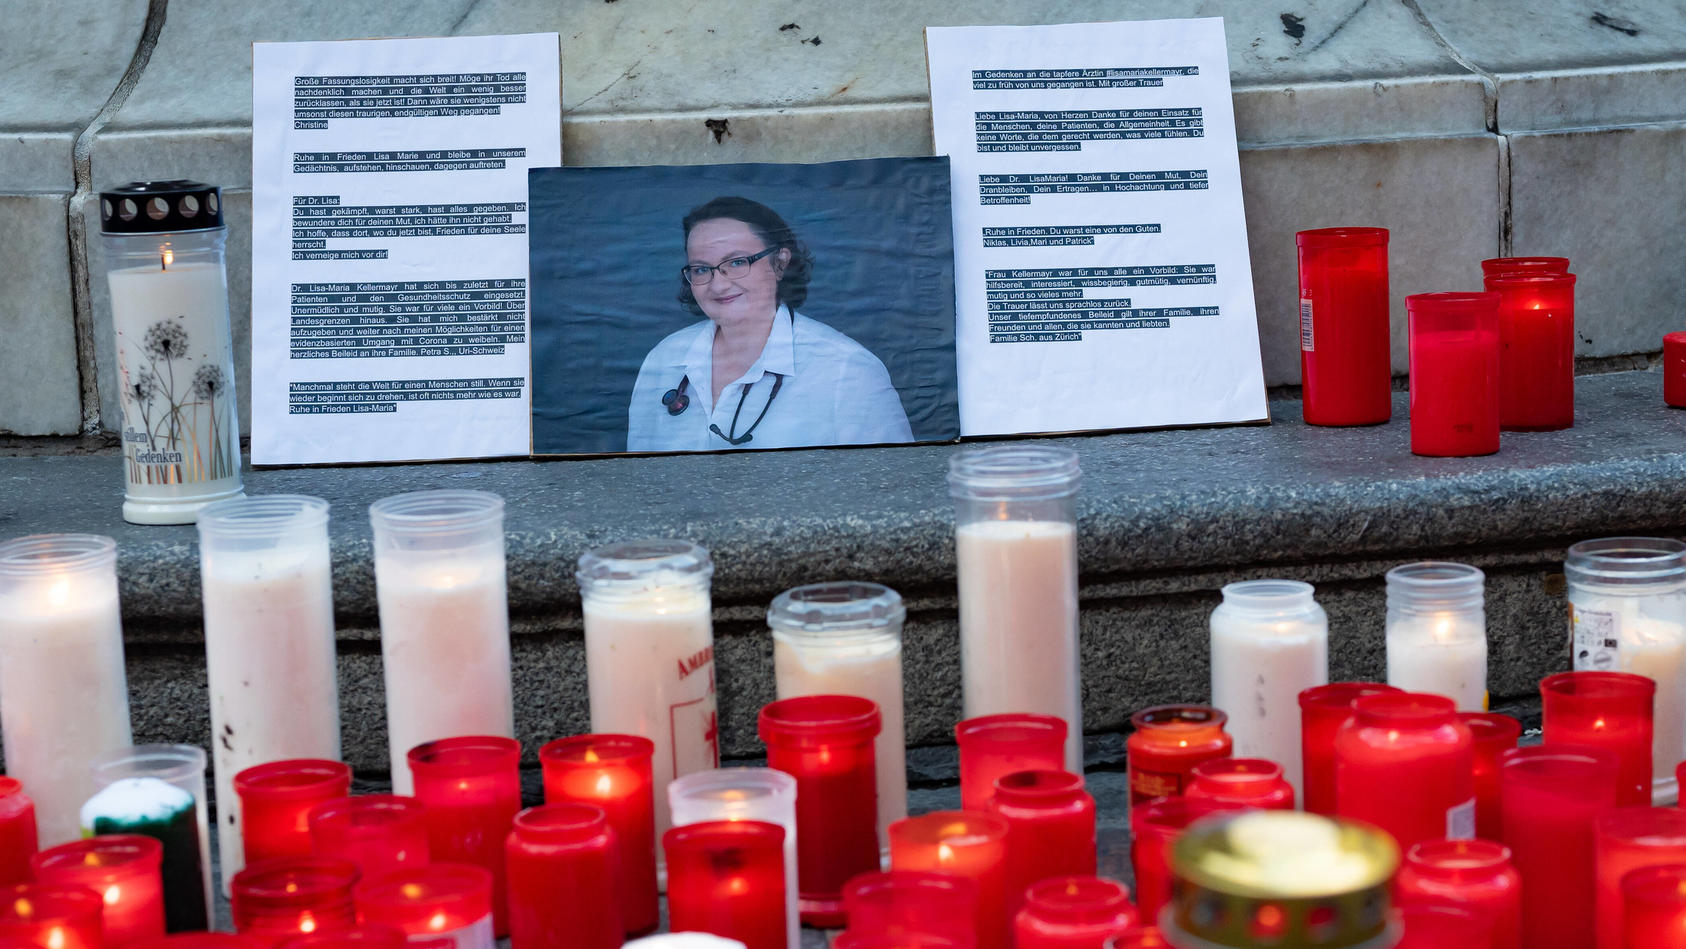  linz, austria, 01 aug 2022, flowers and burning candles lie at a memorial in memory of upper austrian doctor Lisa-Maria Kellermayr at the place taubenmarkt. the doctor was found dead after comitting suicide in her ordination, which was closed due to